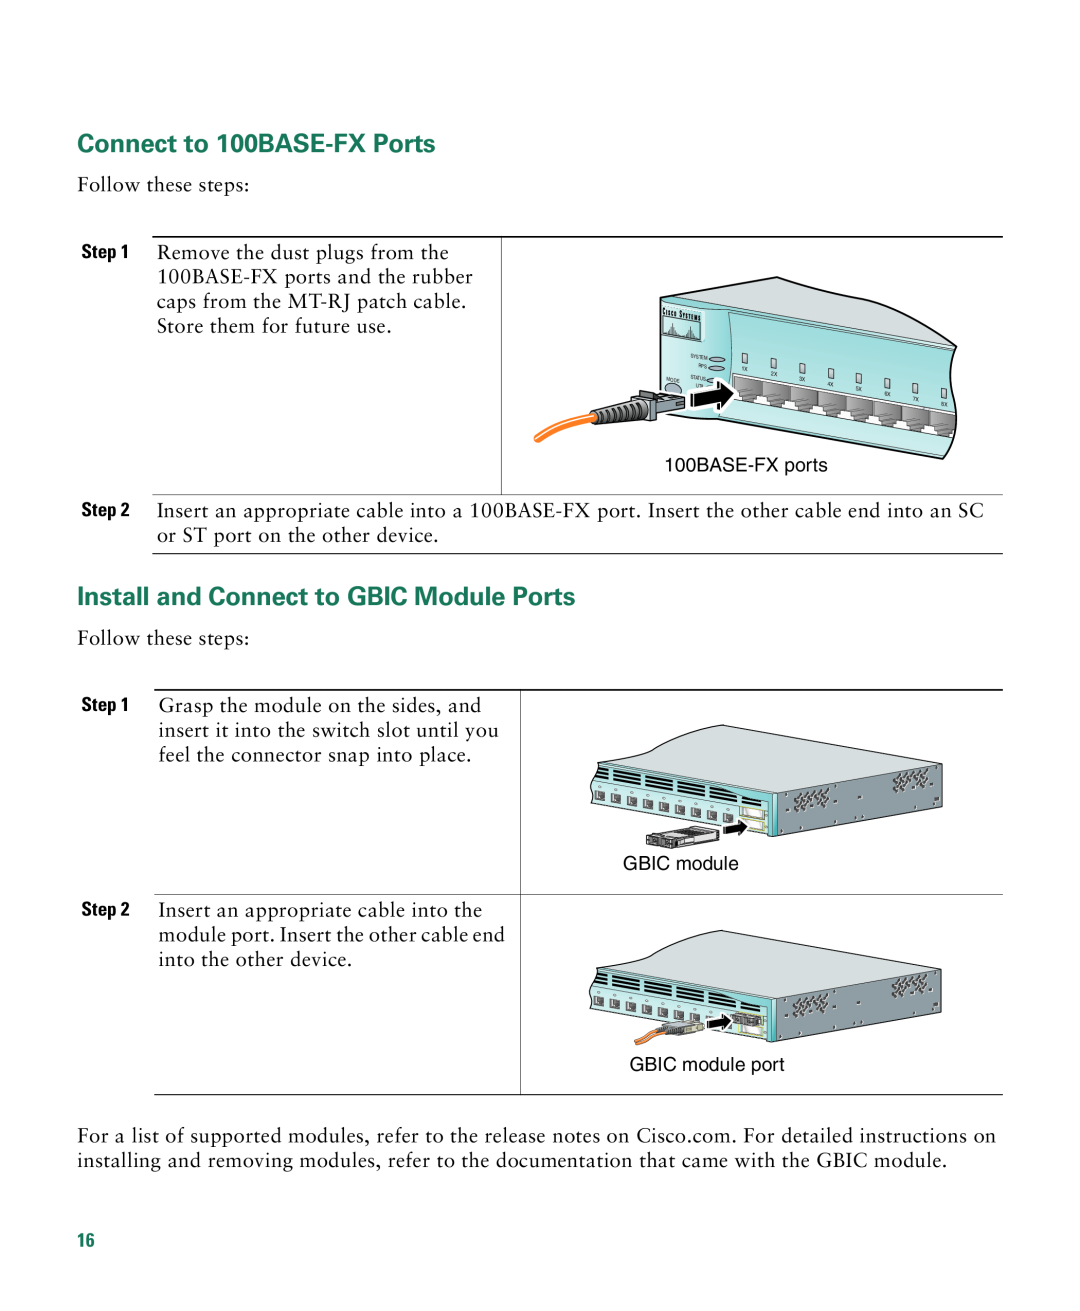 Cisco Systems Catalyst 3550 Connect to 100BASE-FX Ports, Install and Connect to GBIC Module Ports, 100BASE-FX ports 